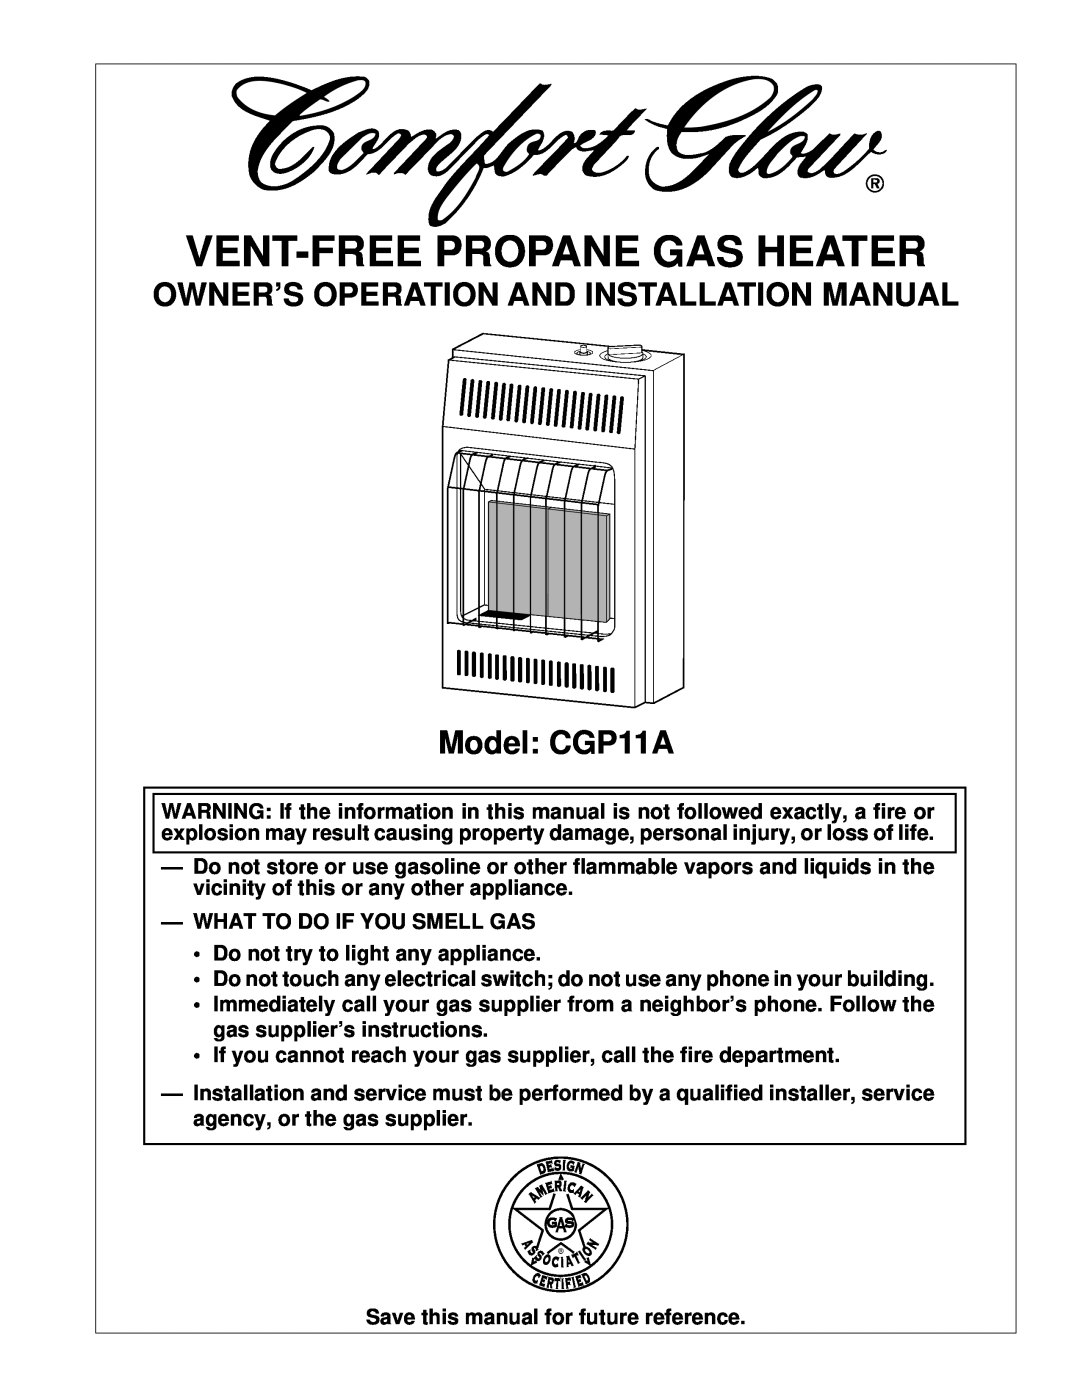 Desa installation manual Owner’S Operation And Installation Manual, Model: CGP11A, Vent-Freepropane Gas Heater 